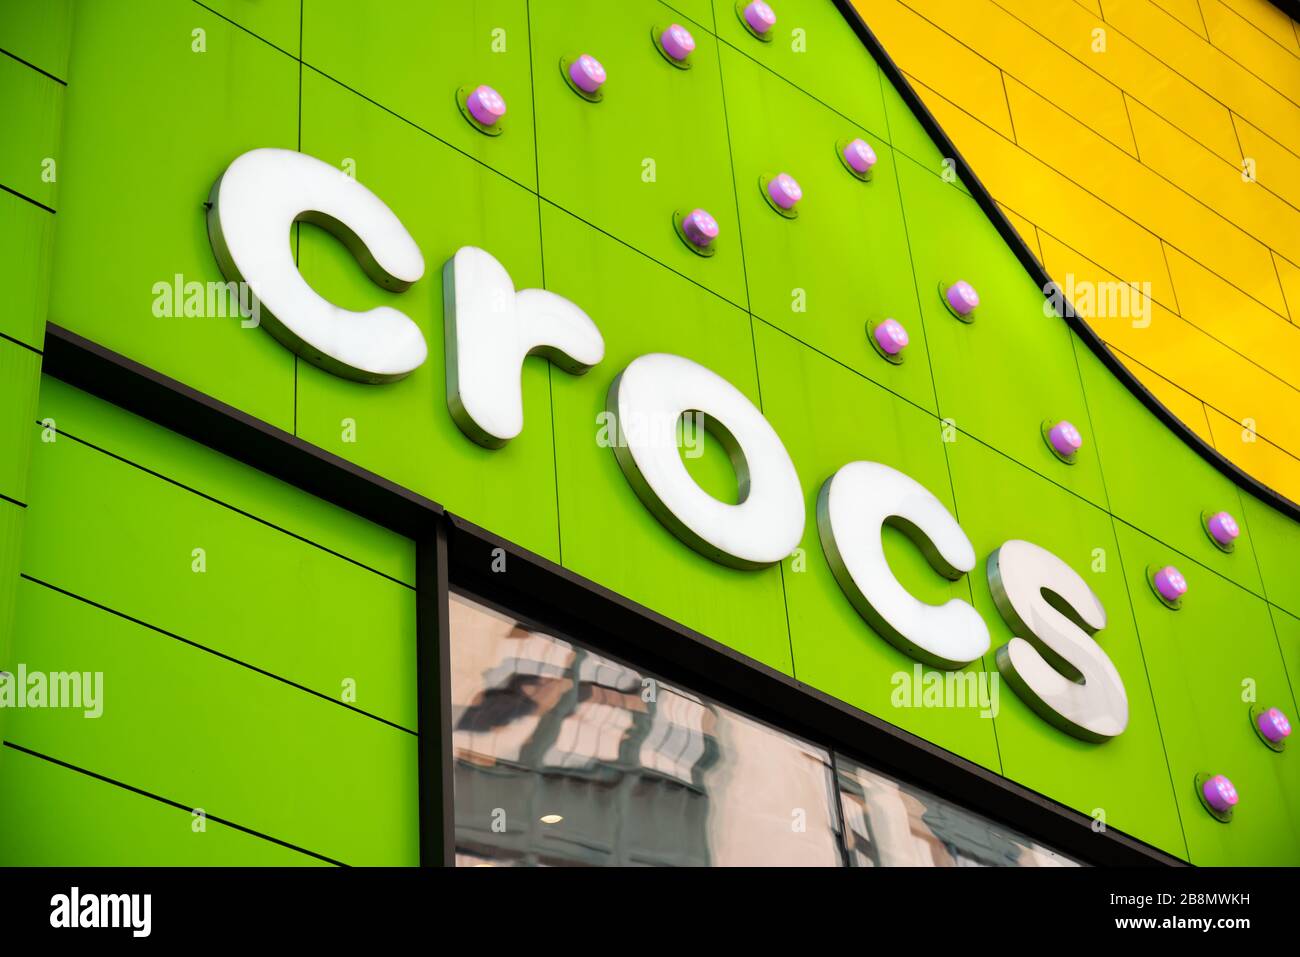 American foam clog shoes company, Crocs store and logo seen in New York  City Stock Photo - Alamy